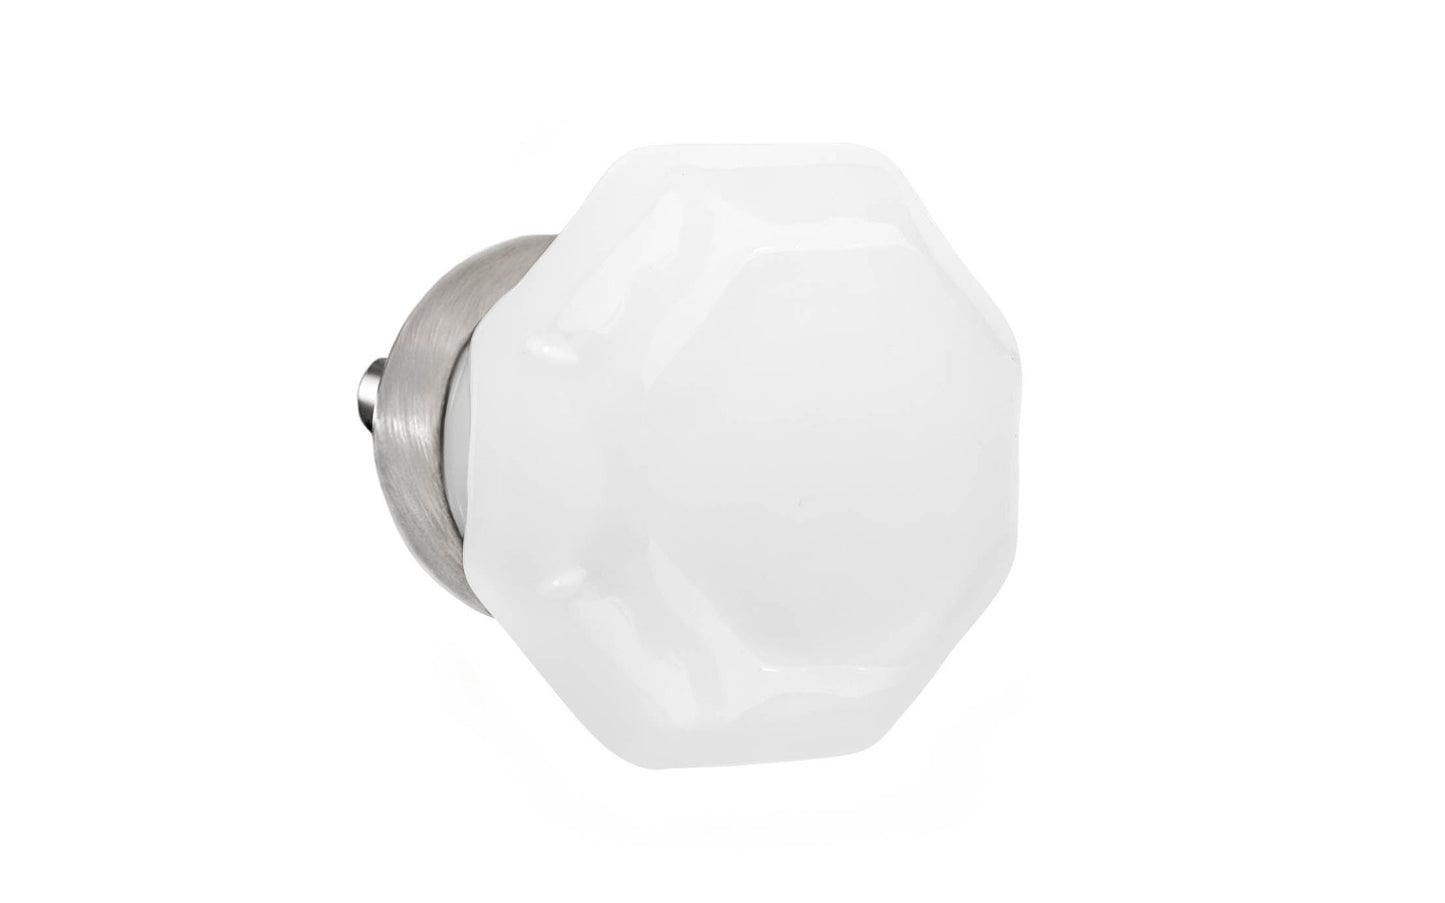 Elegant & classic octagonal cabinet glass knob with an attractive "Translucent White Opal" color. The glass is carefully set into a handsome solid brass base with a threaded shank in the back. Brushed nickel finish on solid brass material. Octagon shape knob. 1-1/4" Diameter Knob 